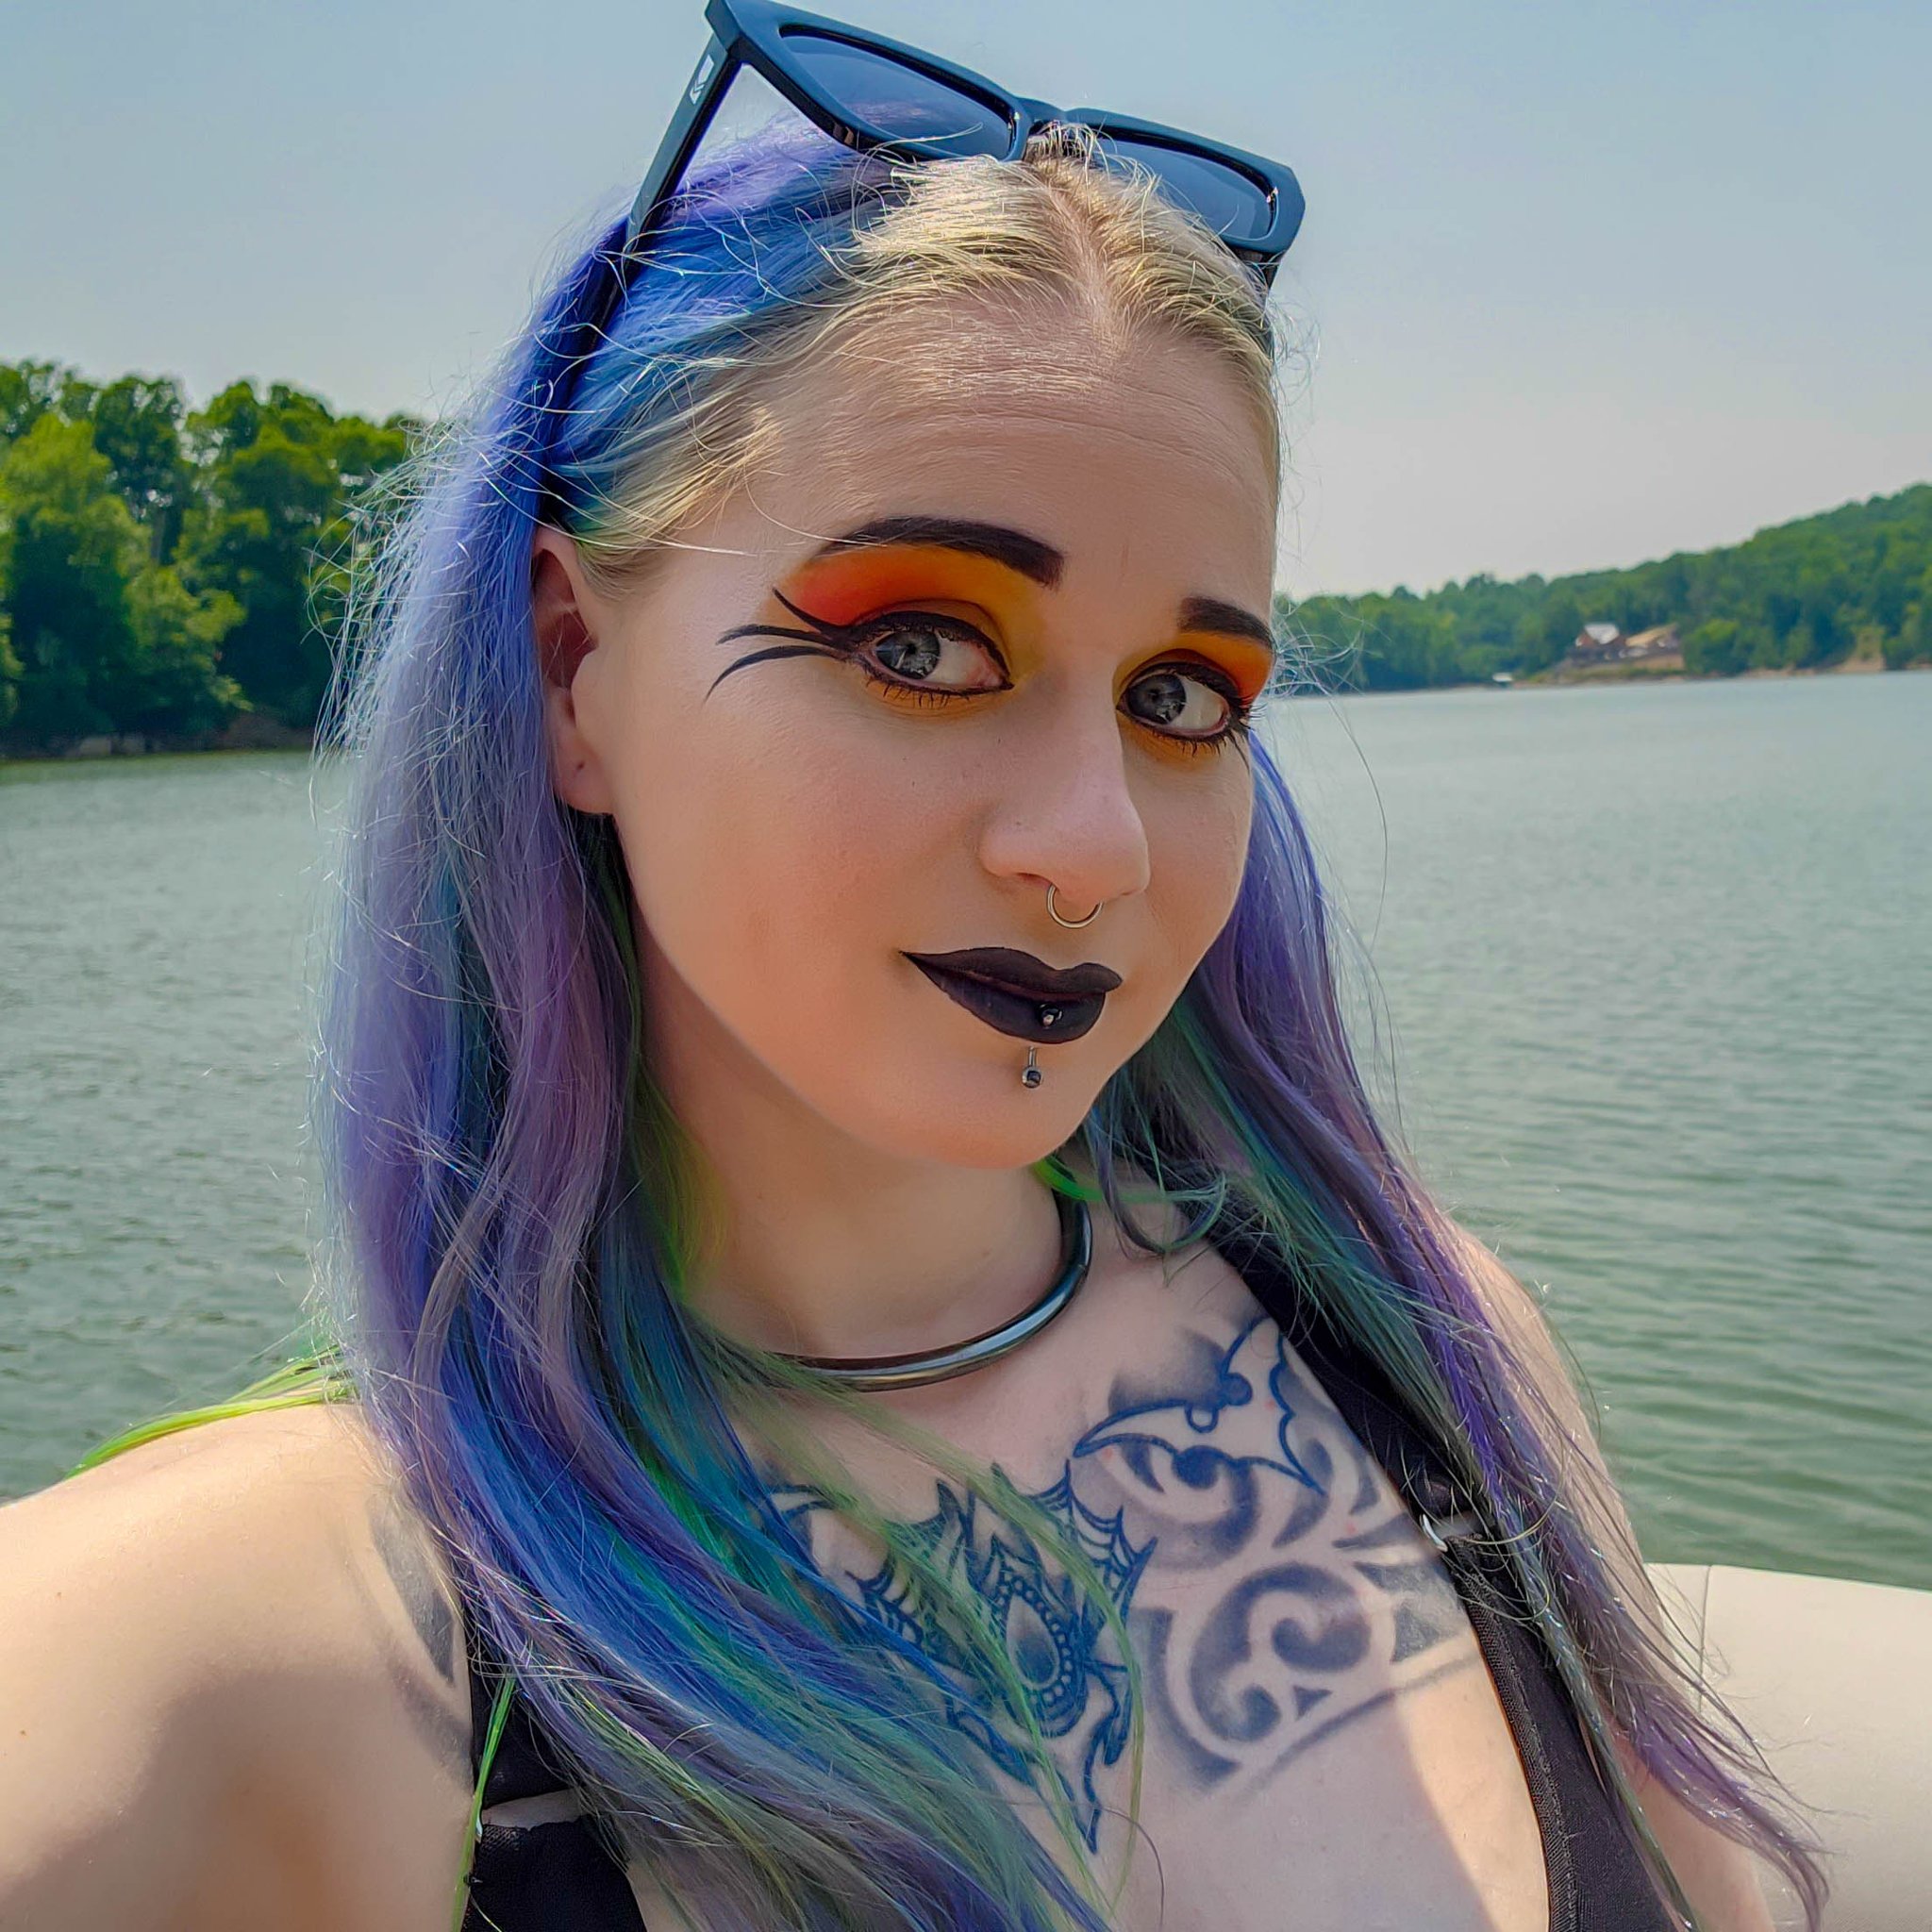 Tw Pornstars Chelsea Christian 🗡🔮 Twitter Its Warm Enough For Time On The Lake Yay More